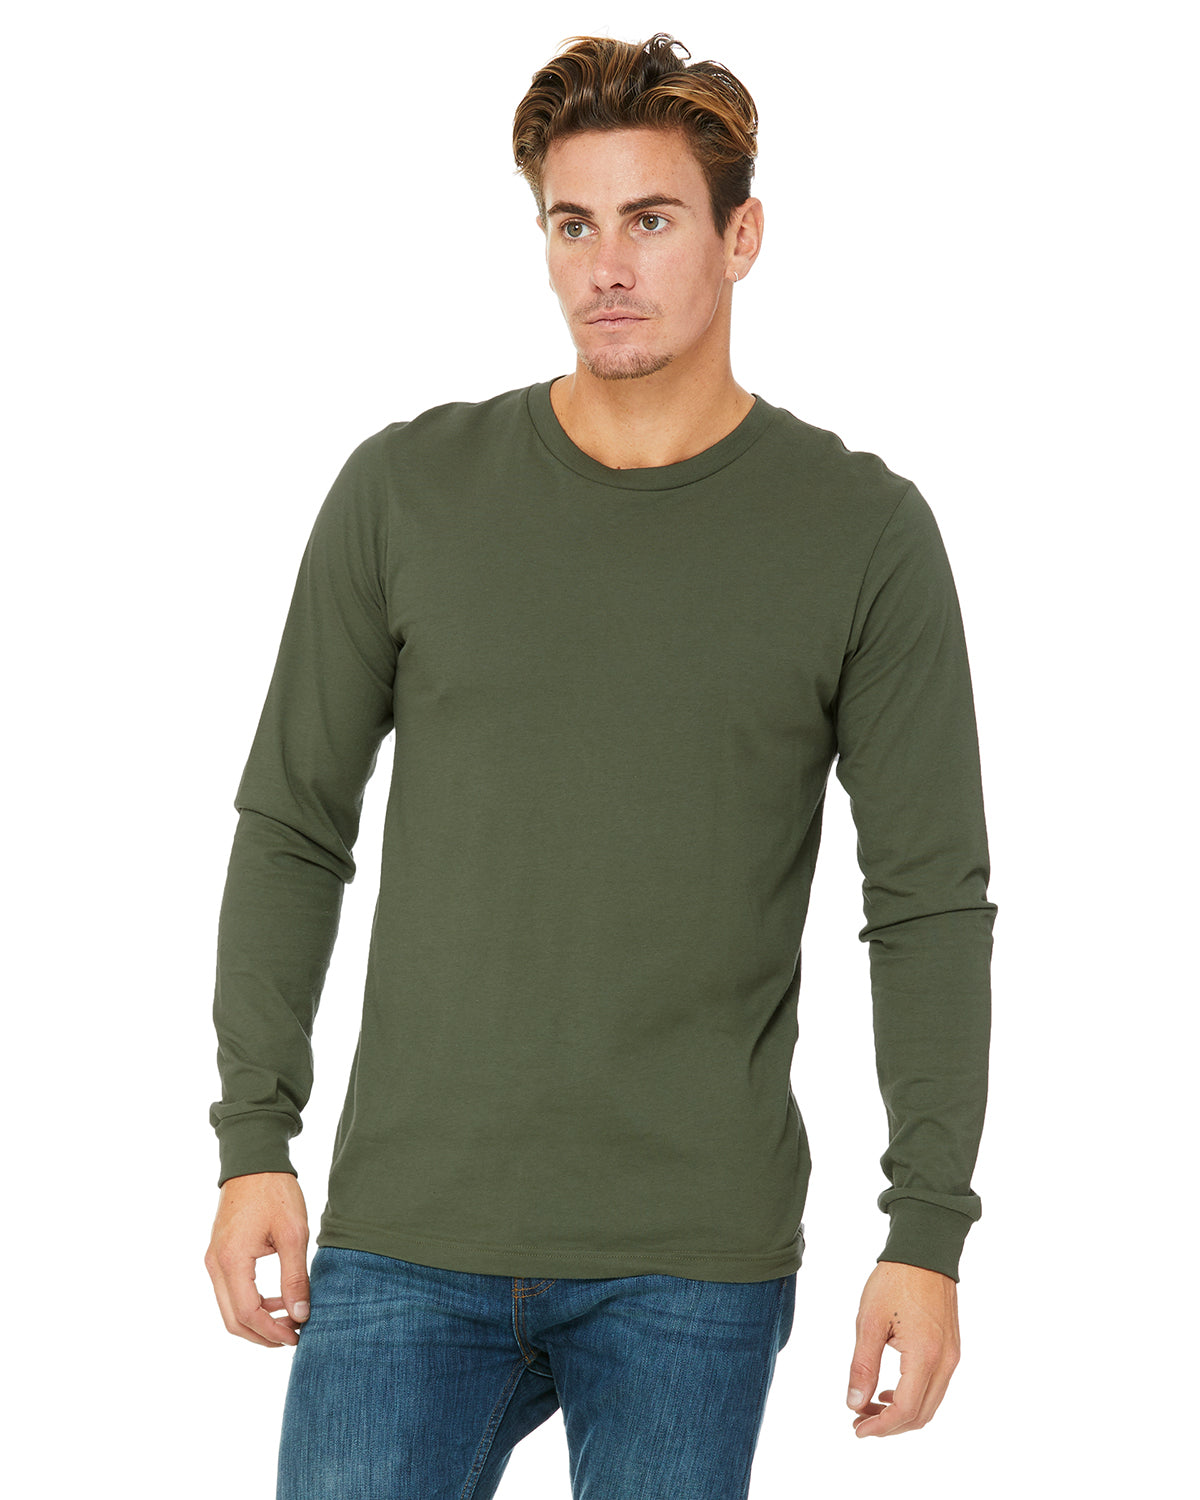 The Way of the Leaf Unisex Premium Long Sleeve T-Shirt 3501